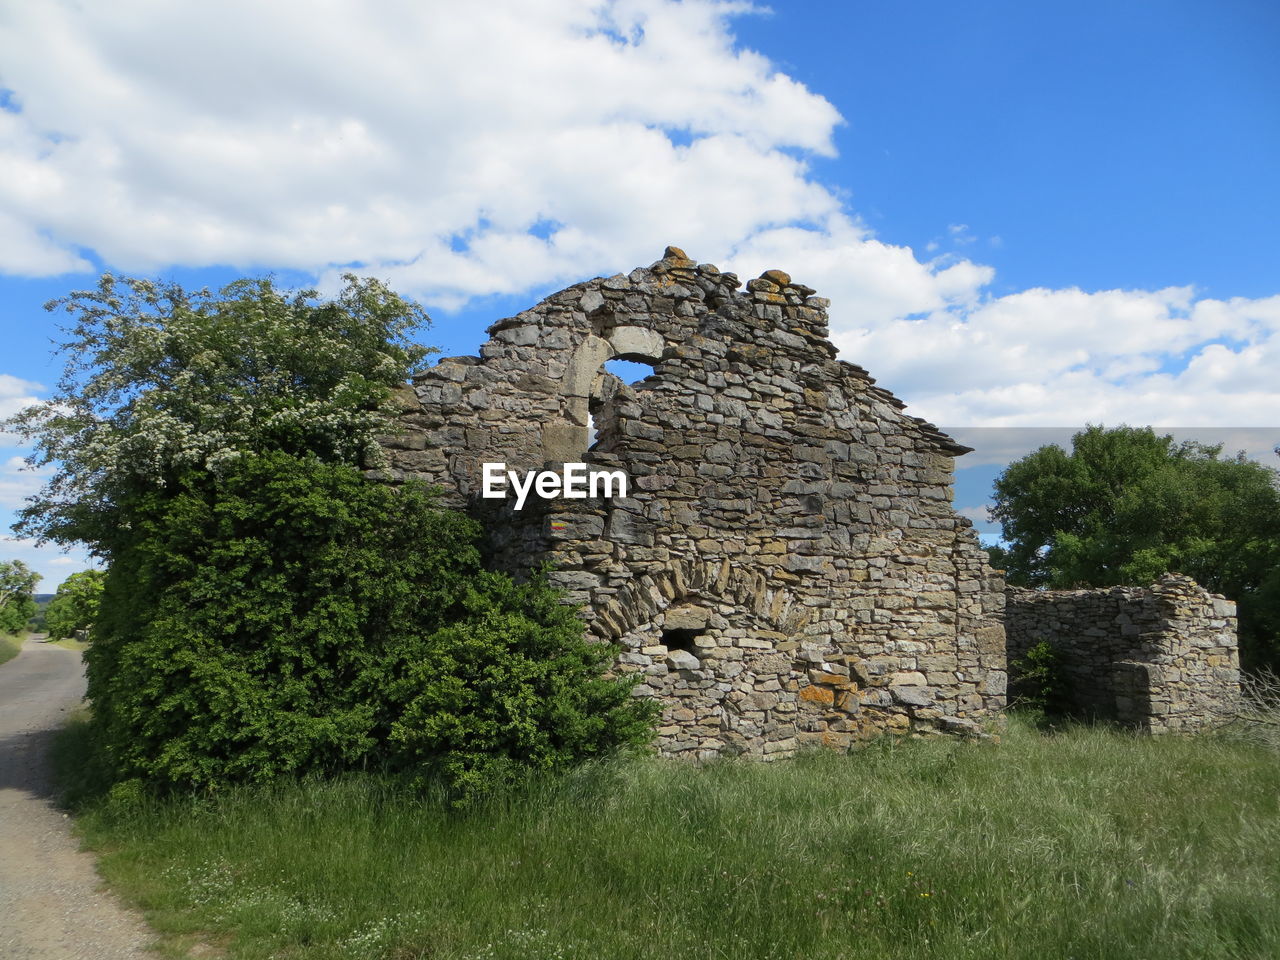 OLD RUIN OF BUILDING